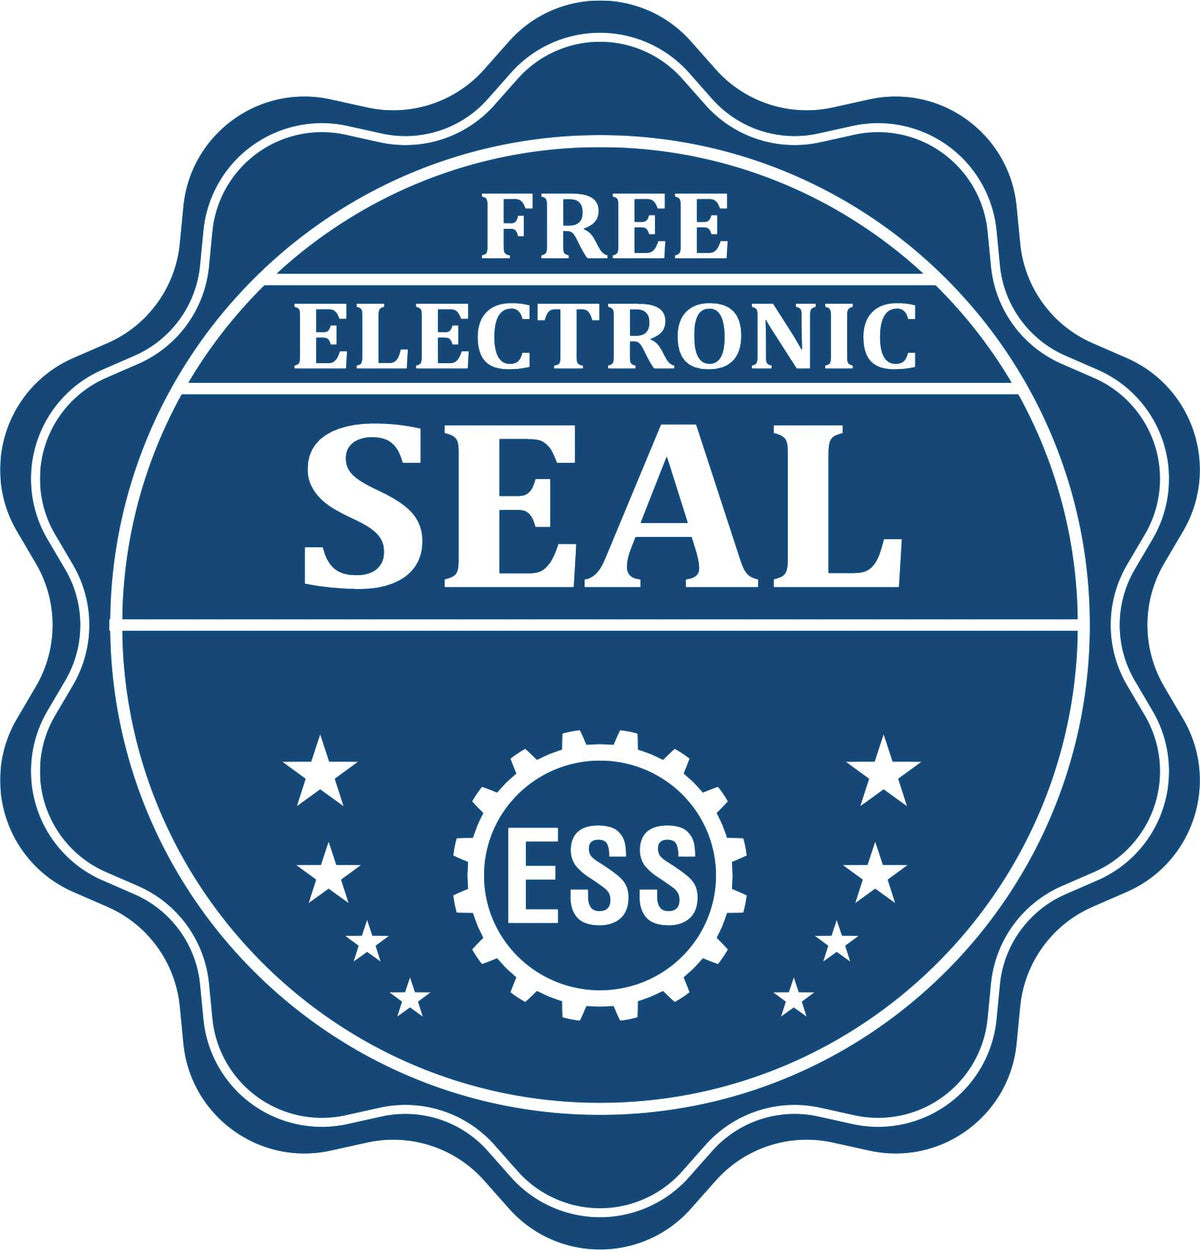 A badge showing a free electronic seal for the Long Reach New Hampshire Geology Seal with stars and the ESS gear on the emblem.